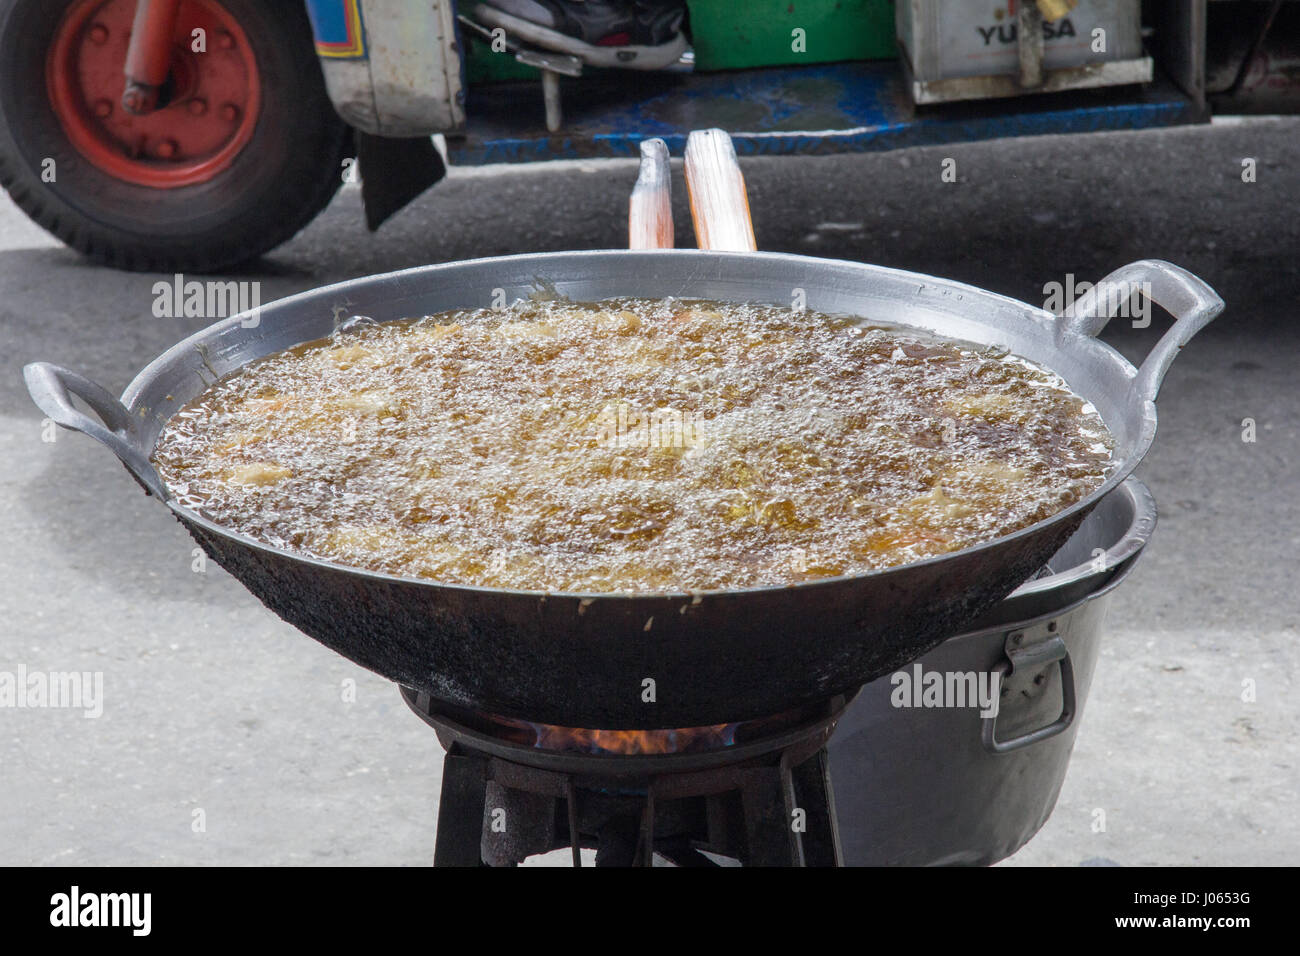 Dangerous pan full of boiling oil on a street in Chinatown, Bangkok, Thailand Stock Photo